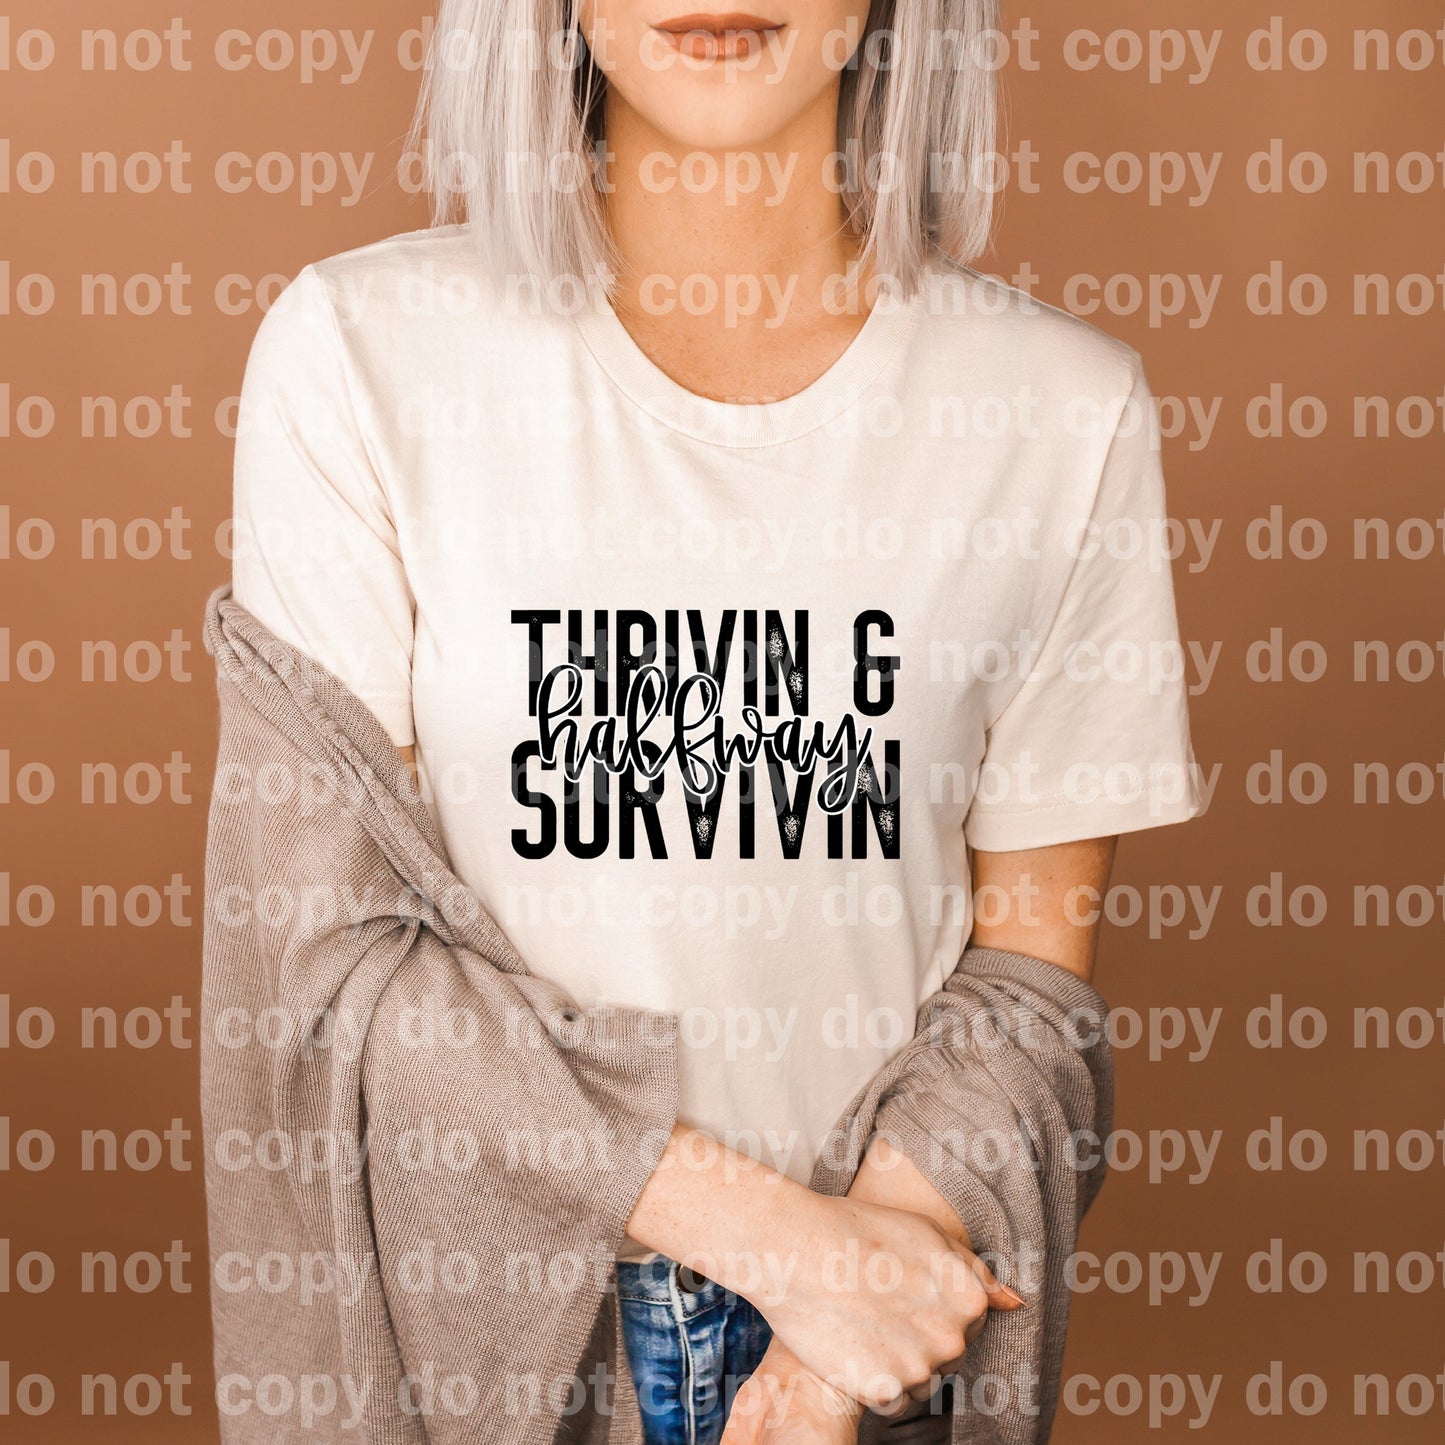 Thrivin And Halfway Survivin Dream Print or Sublimation Print